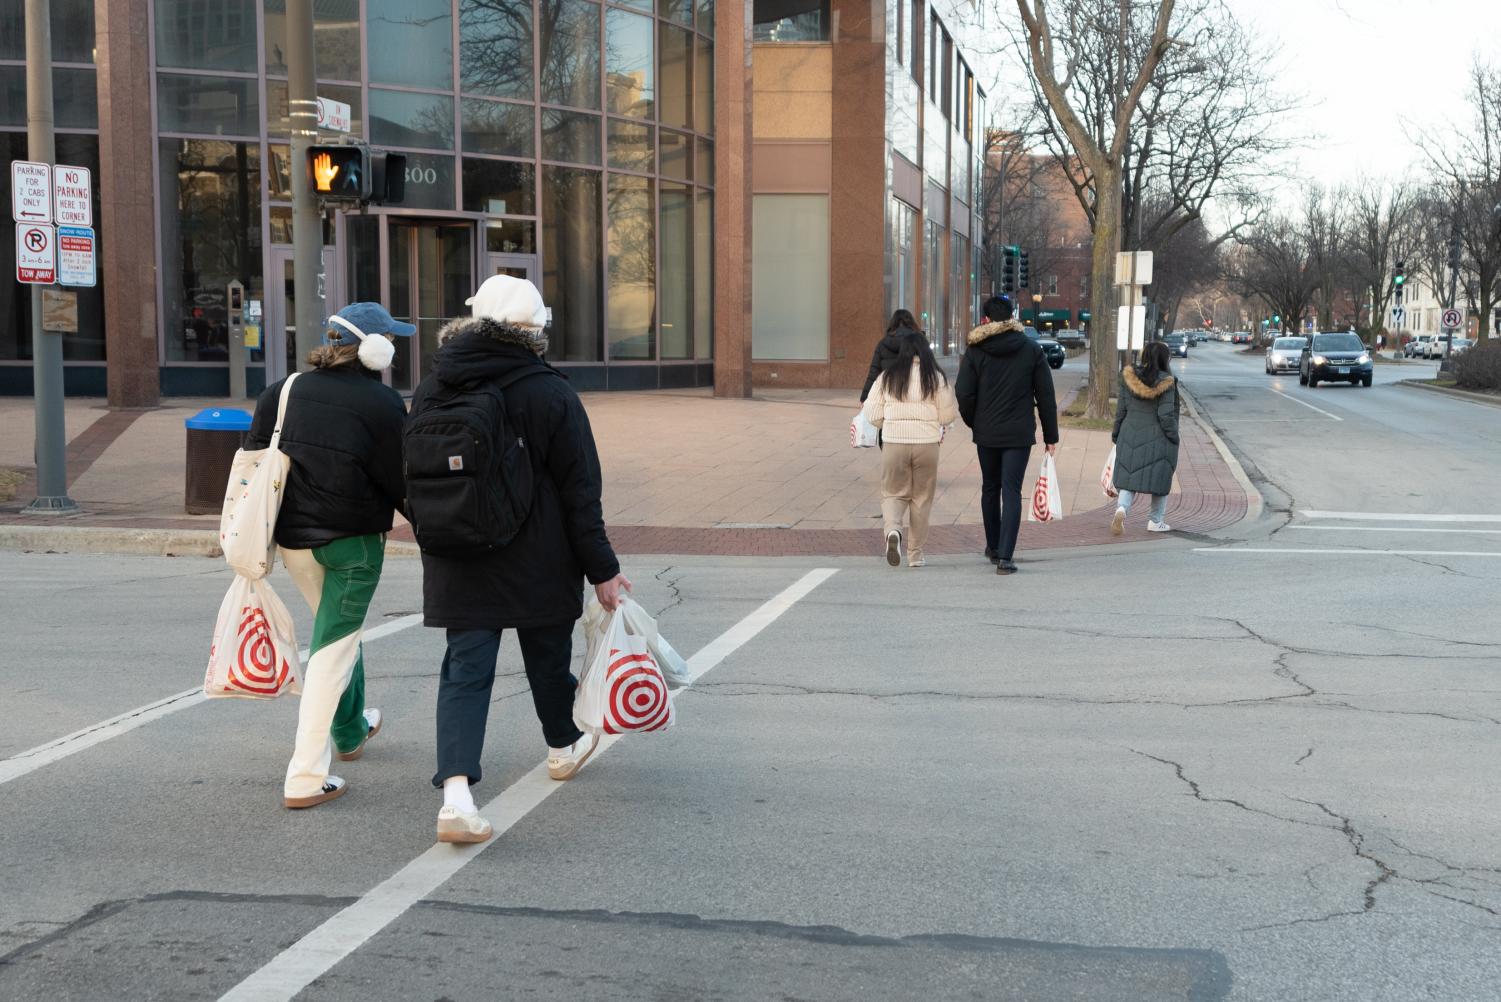 Two+pairs+of+pedestrians+are+crossing+the+road+and+carrying+white+plastic+bags+from+Target.